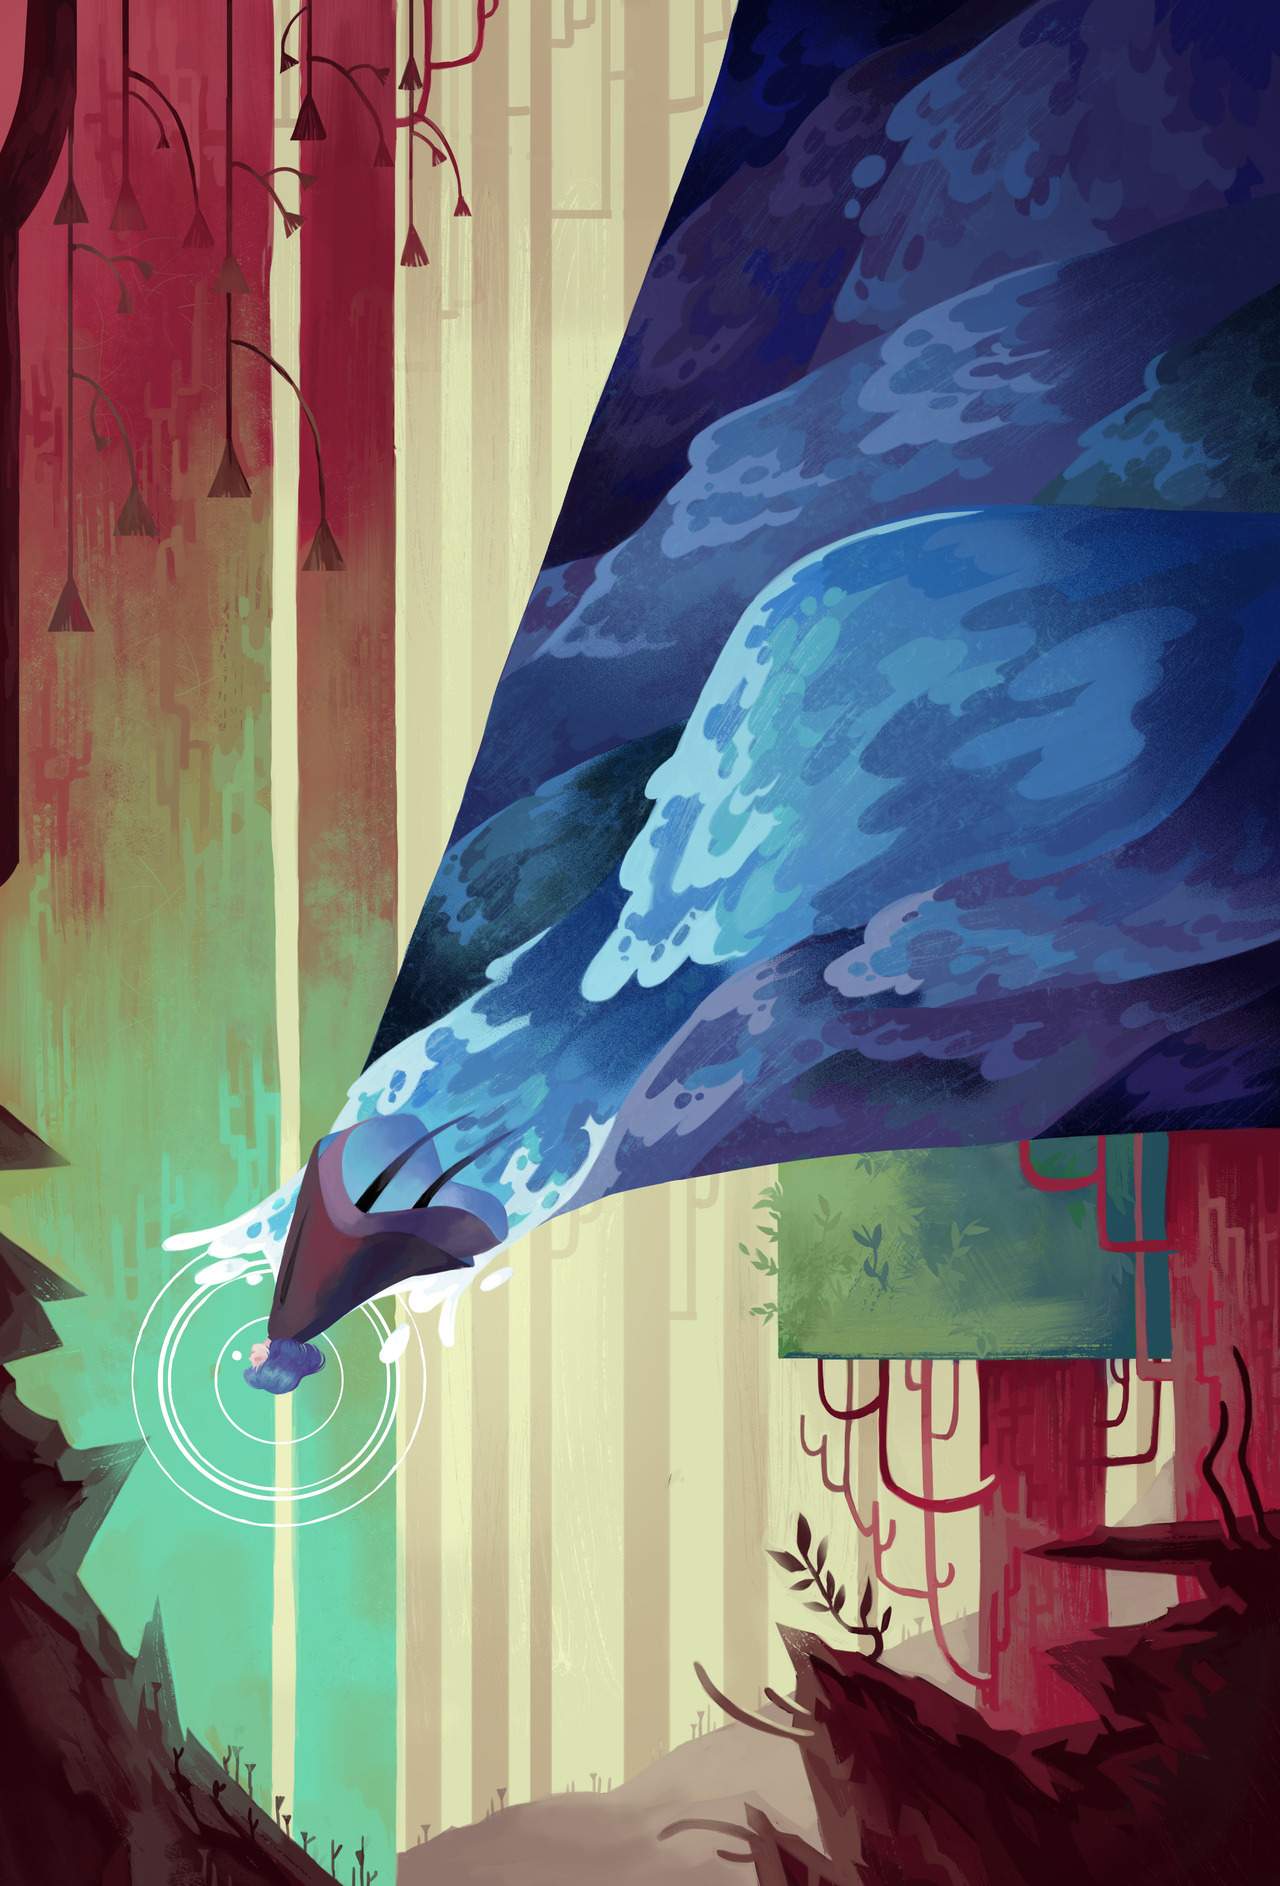 thedustyleaves: Completely forgot to upload this to my tumblr! I worked on this piece